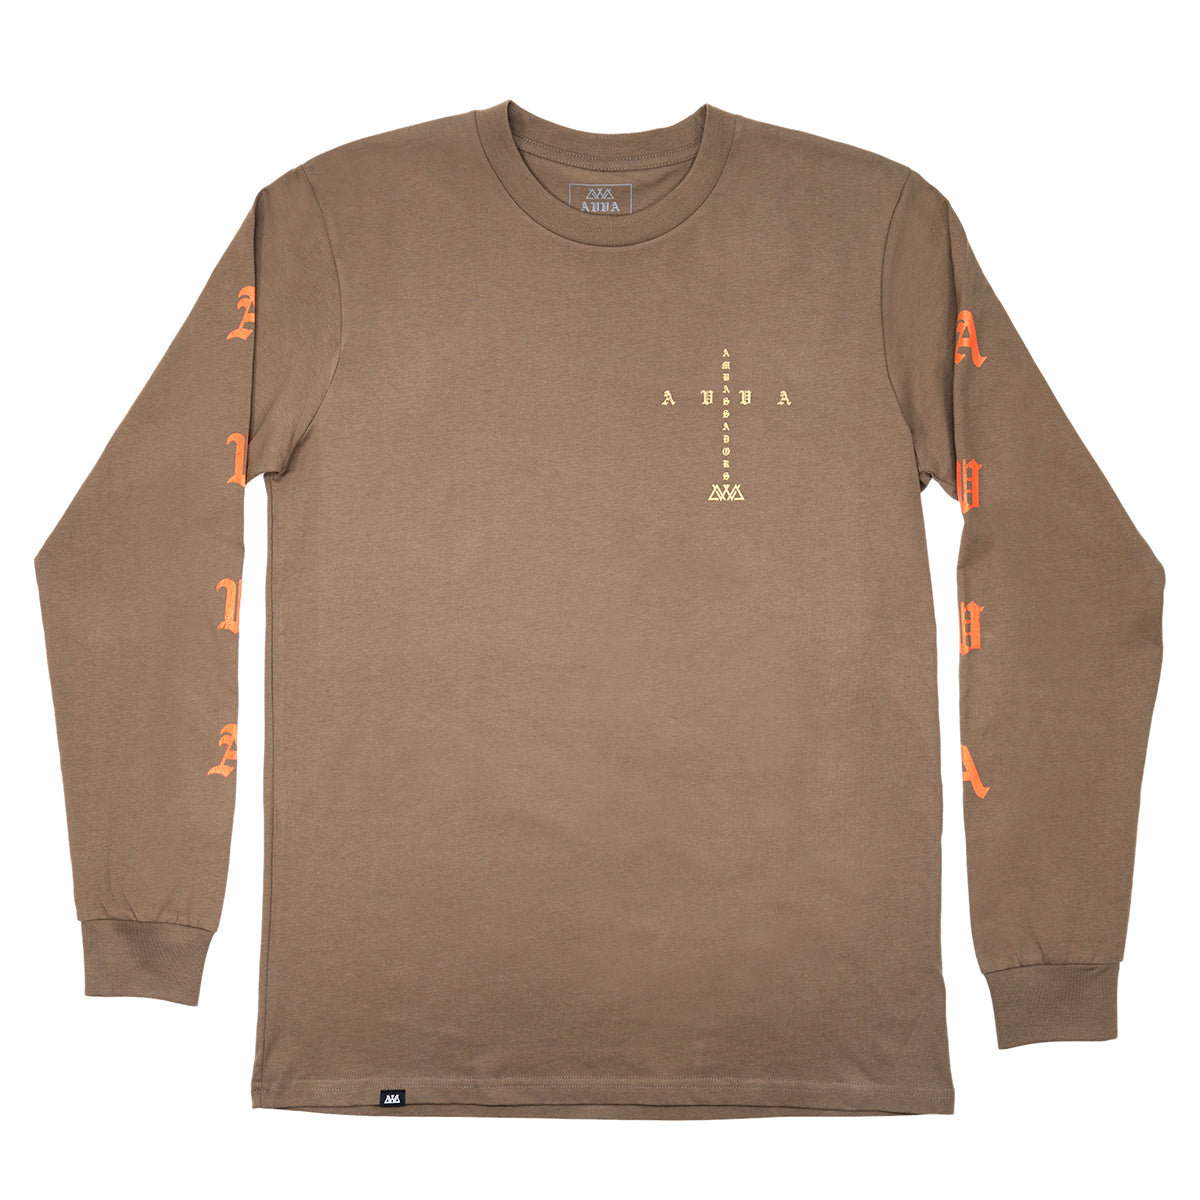 FRONT VIEW OF BROWN ONO LONGSLEEVE WITH A CROSS SHAPED AVVA ABASSADORS LOGO IN THE TOP RIGHT OF THE LONGSLEEVE. AVVA IN ORNGE GOING DOWN BOTH ARM SLEEVES.